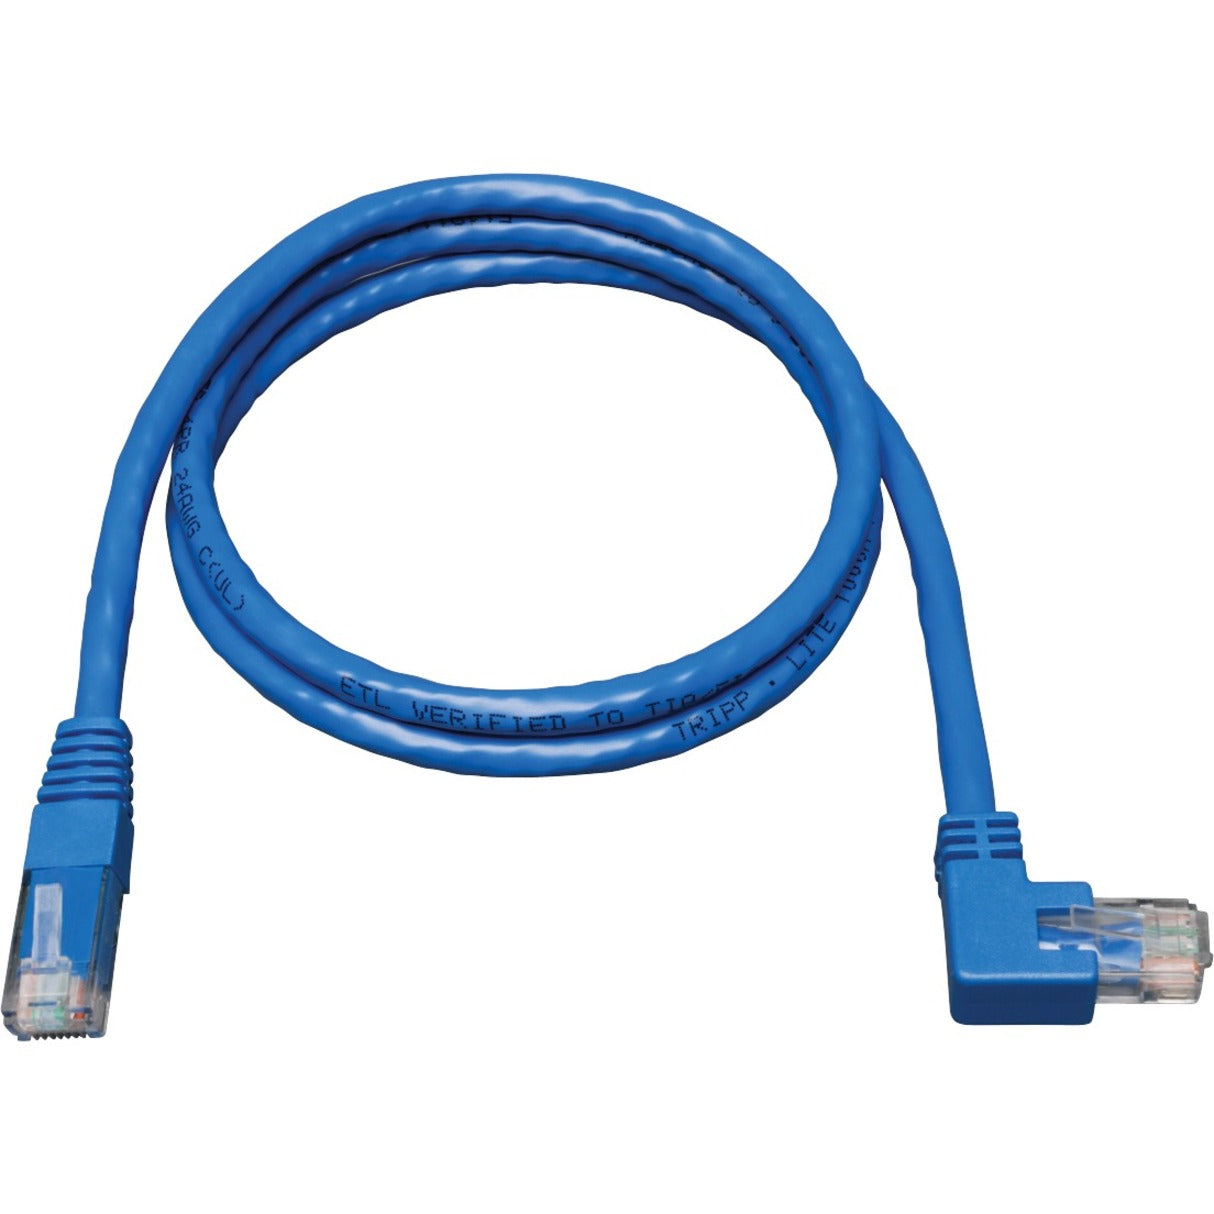 Tripp Lite N204-010-BL-LA Cat6 Patch Cable, 10 ft, Molded, Stranded, Left-angled Connector, Blue